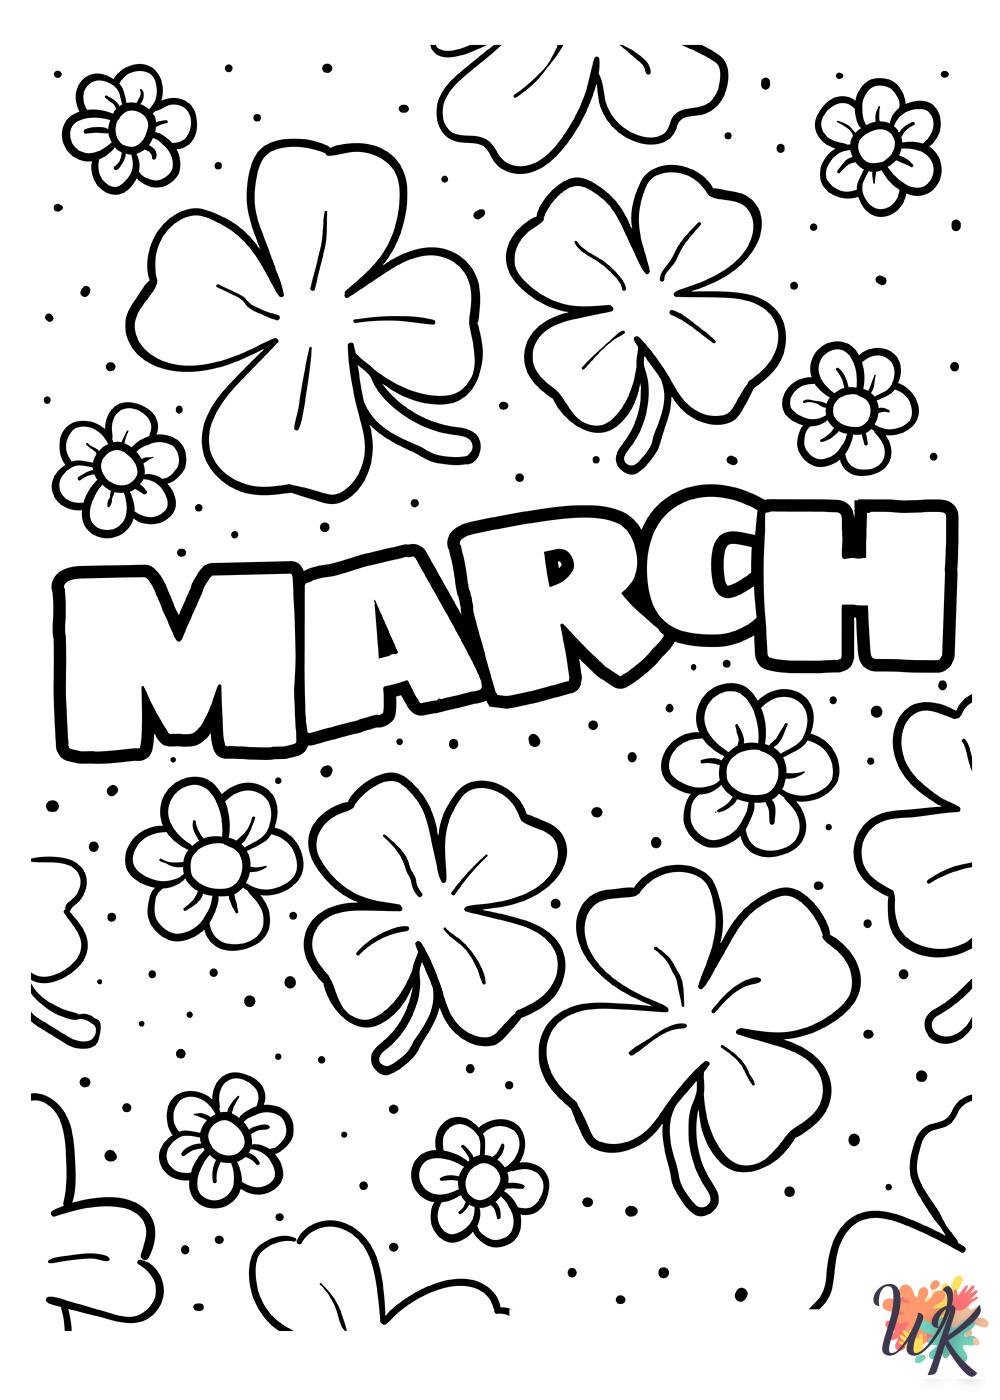 March free coloring pages